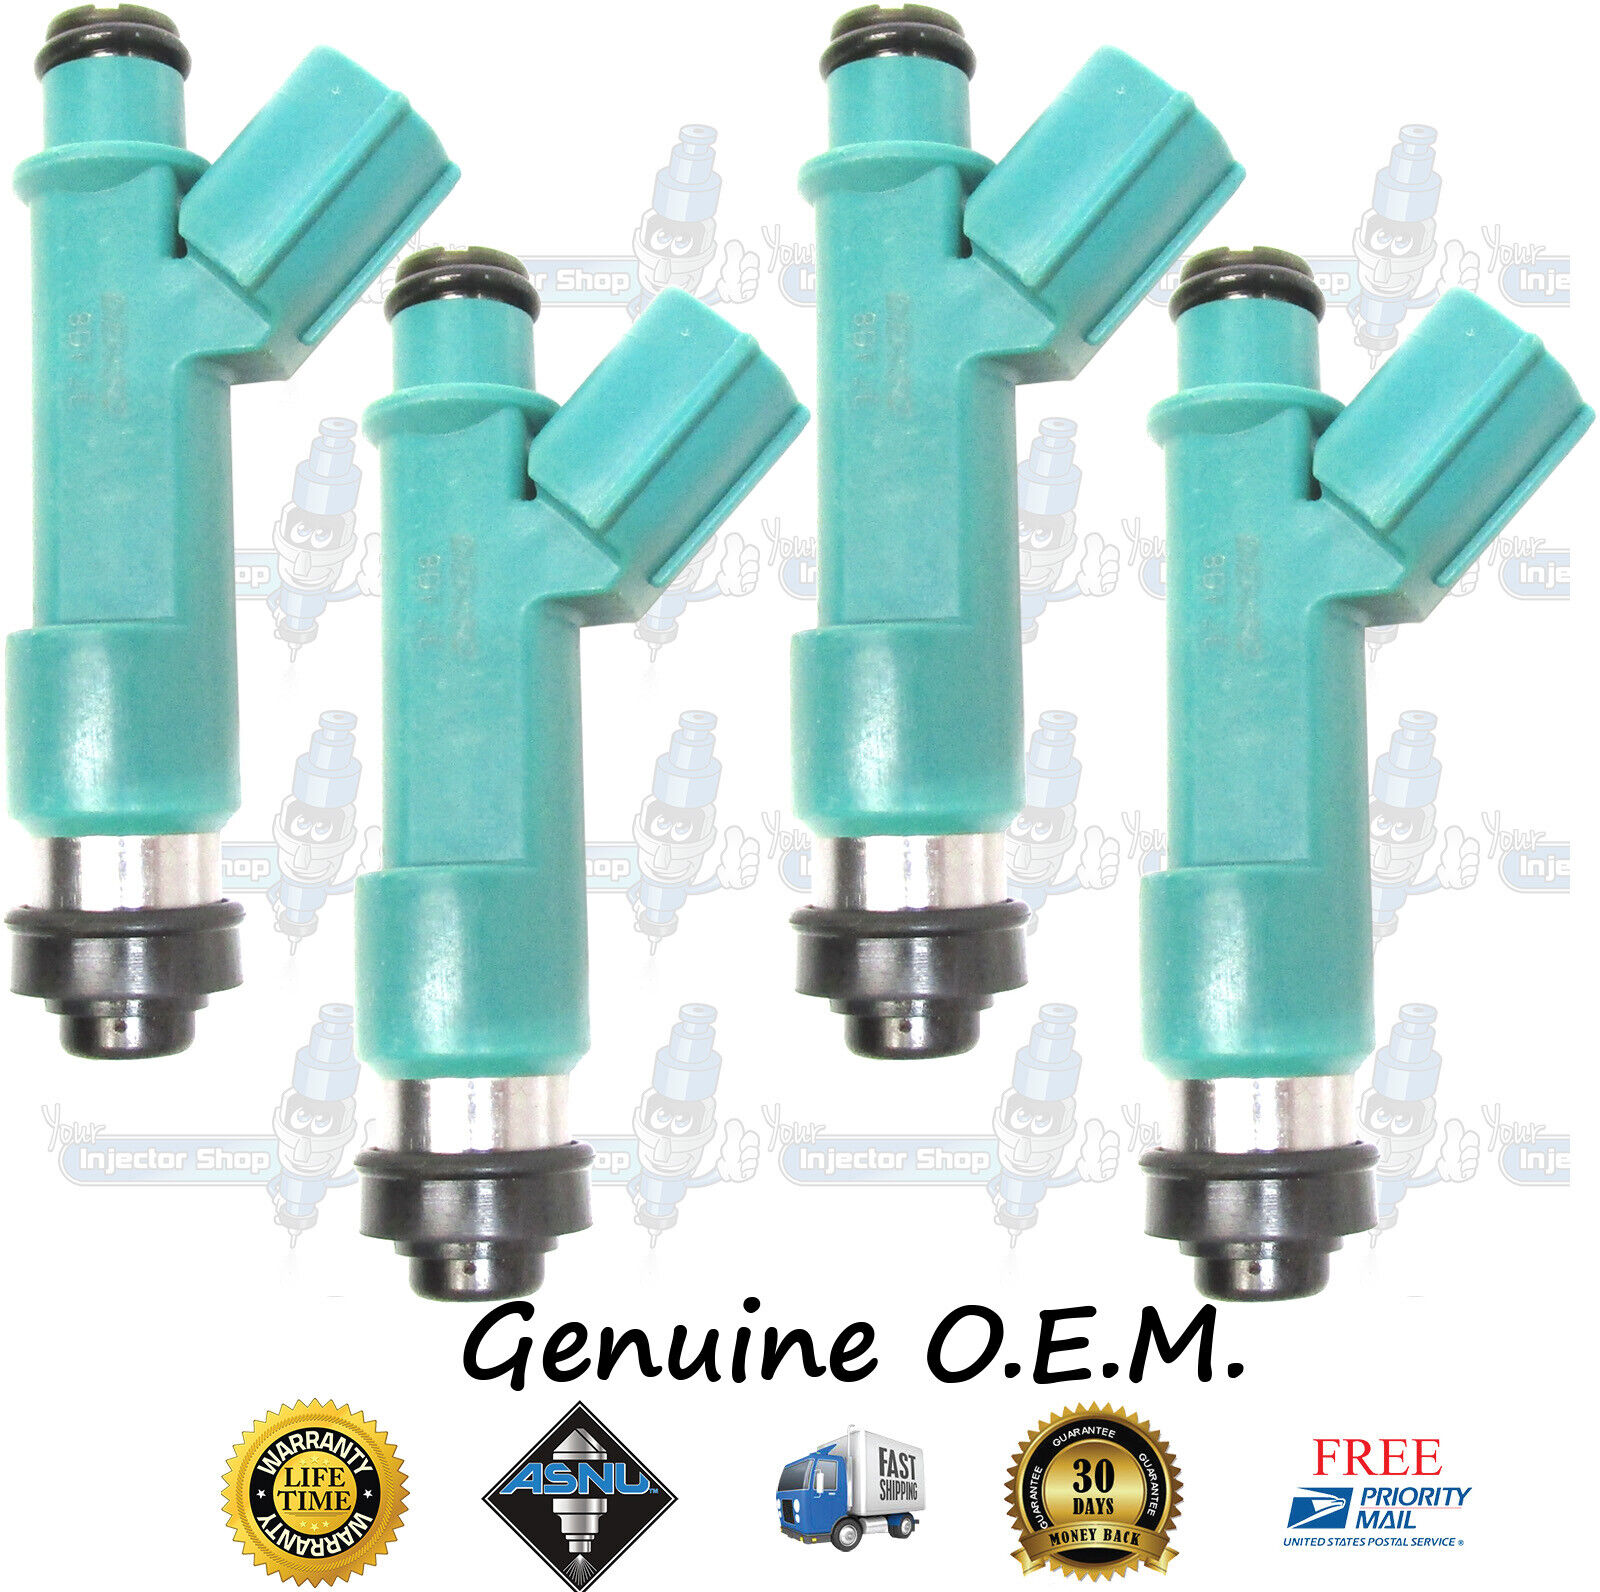 12 Hole Genuine Original Toyota New Orleans Mall 2. Fuel 4x Manufacturer regenerated product 23250-28080 Injectors